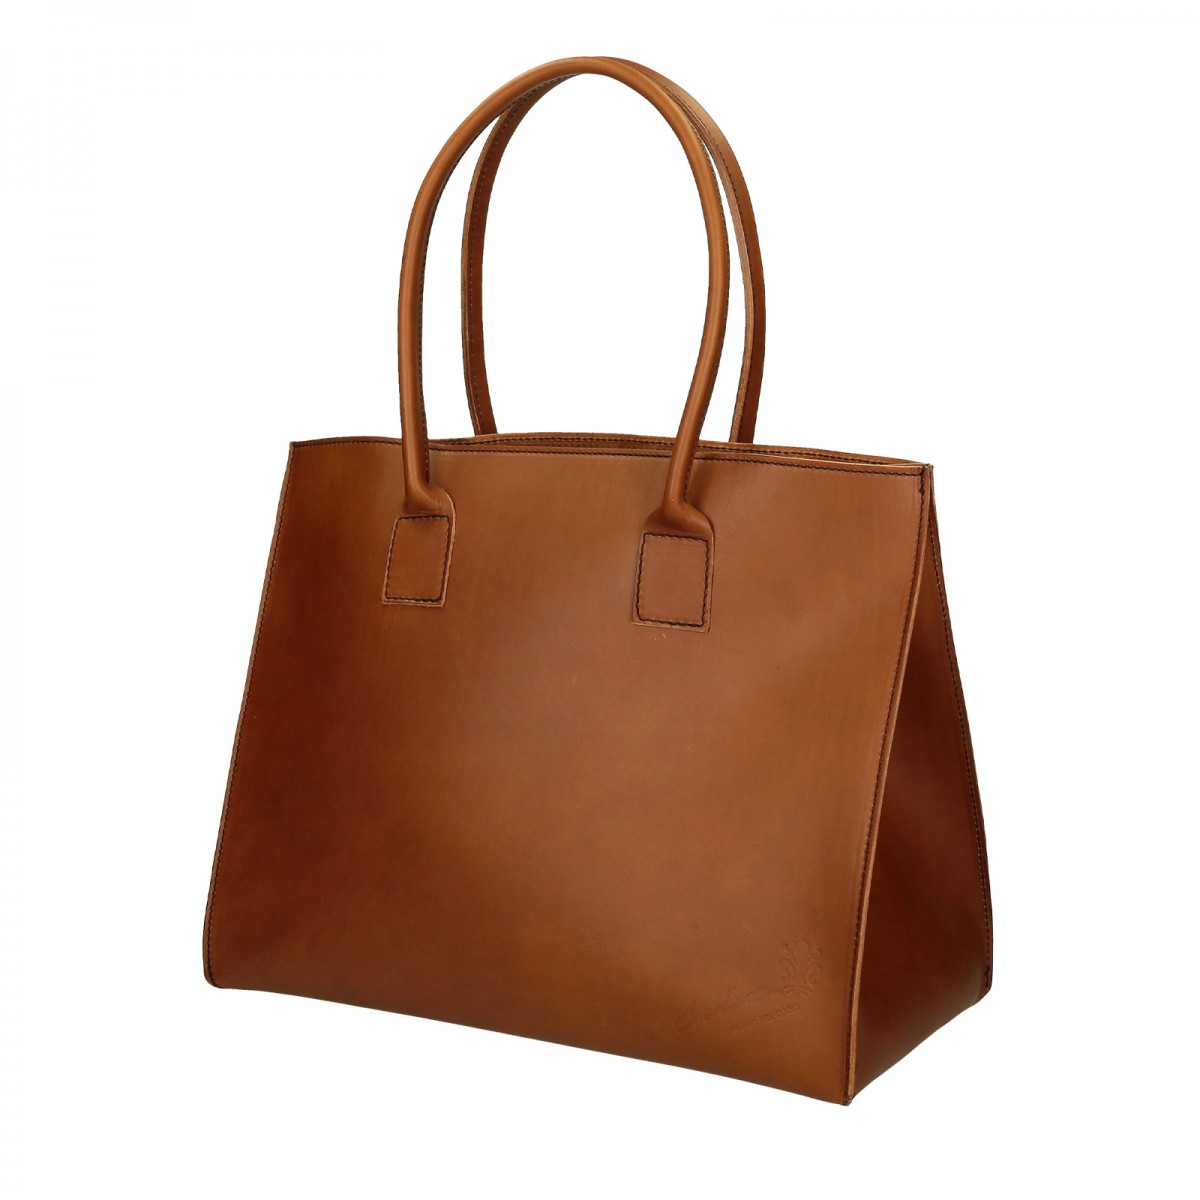 Handmade tote bag for women in tan leather | Gianluca - The leather ...